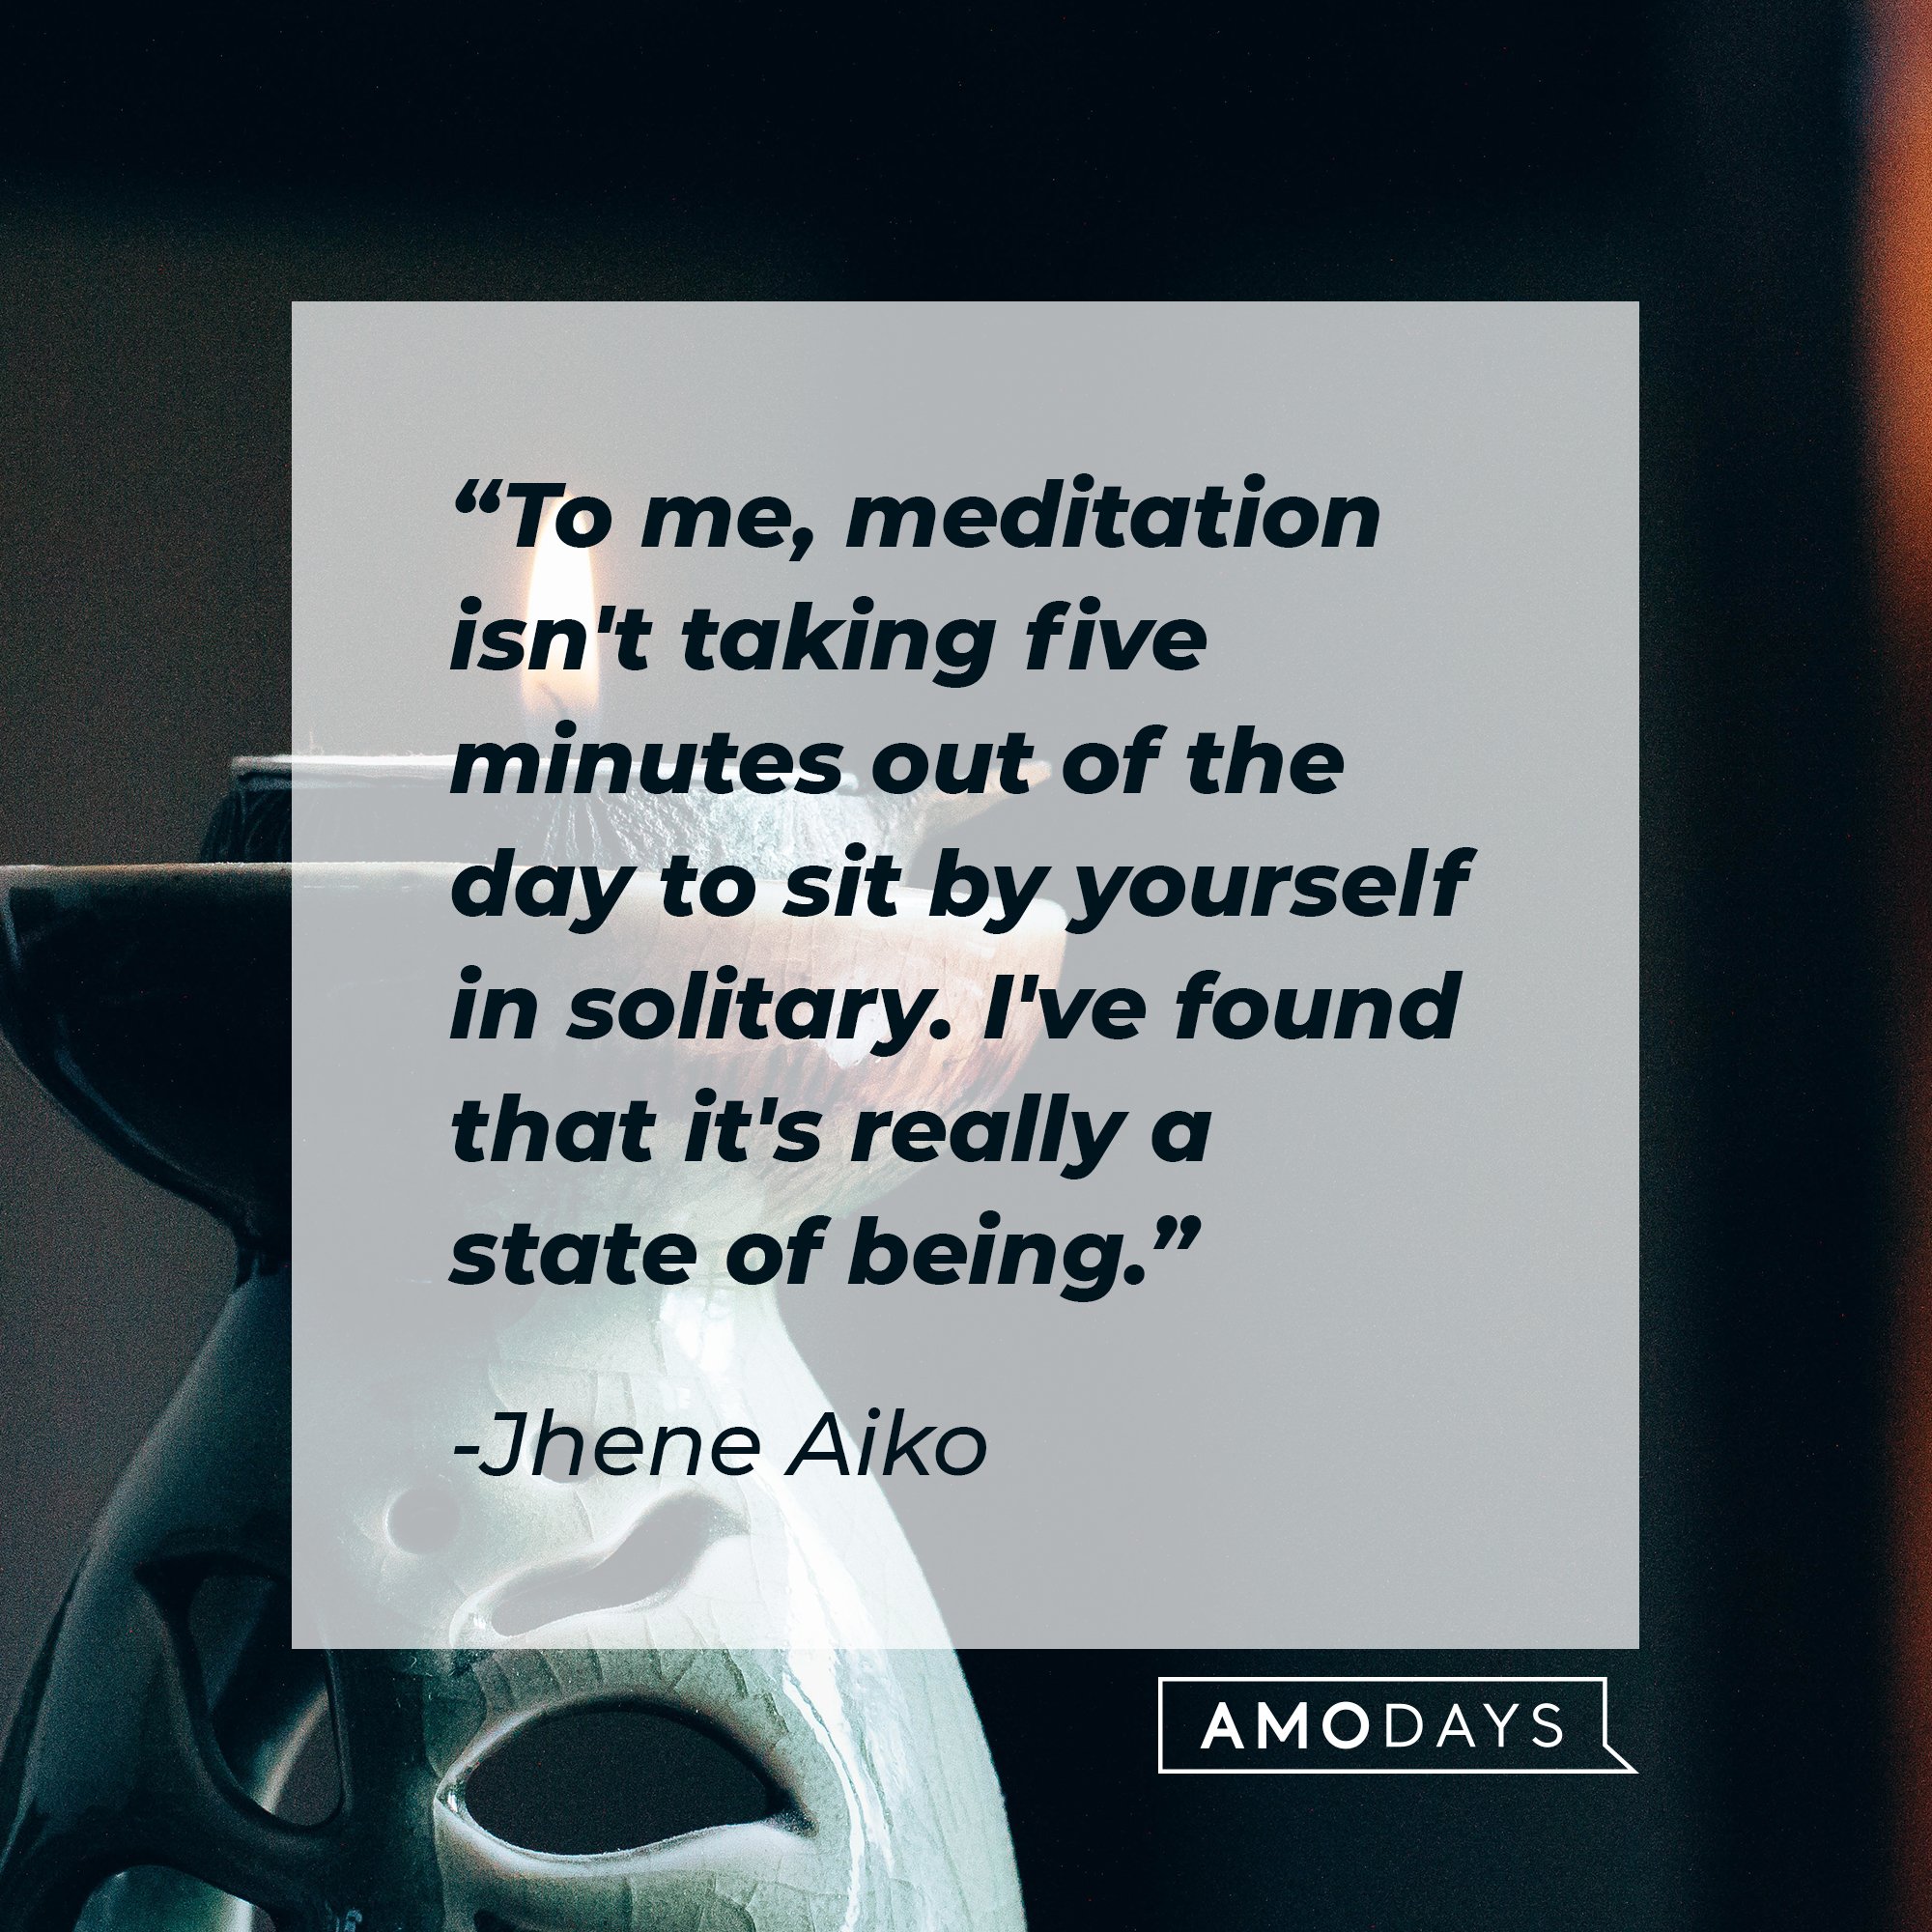  Jhene Aiko's quote: “To me, meditation isn't taking five minutes out of the day to sit by yourself in solitary. I've found that it's really a state of being.” | Image: AmoDays